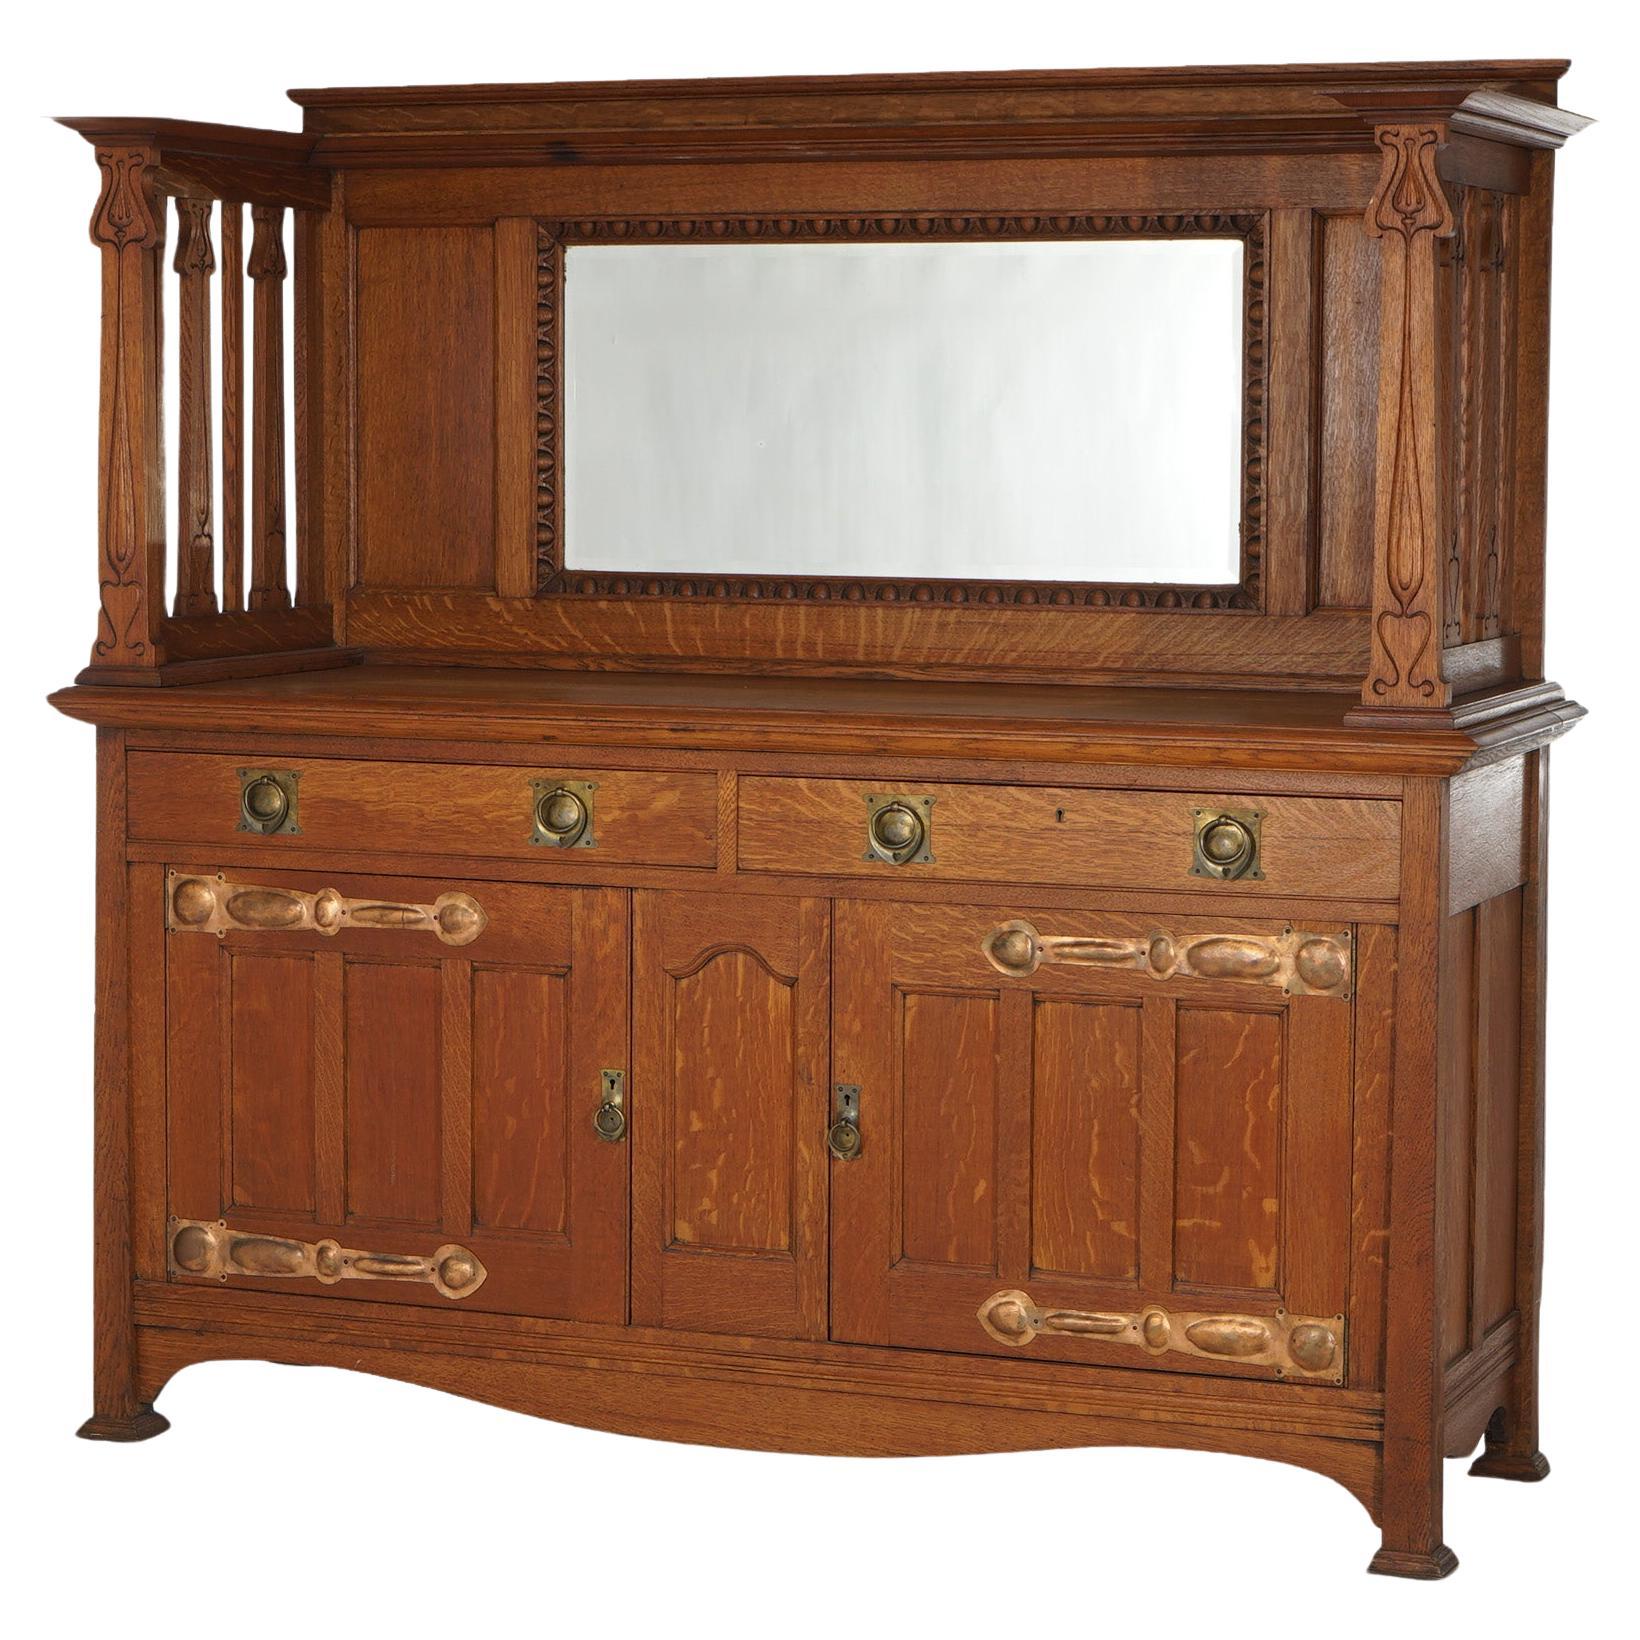 Antique English Arts & Crafts Liberty & Co. Oak Sideboard With Mirror C1910 For Sale